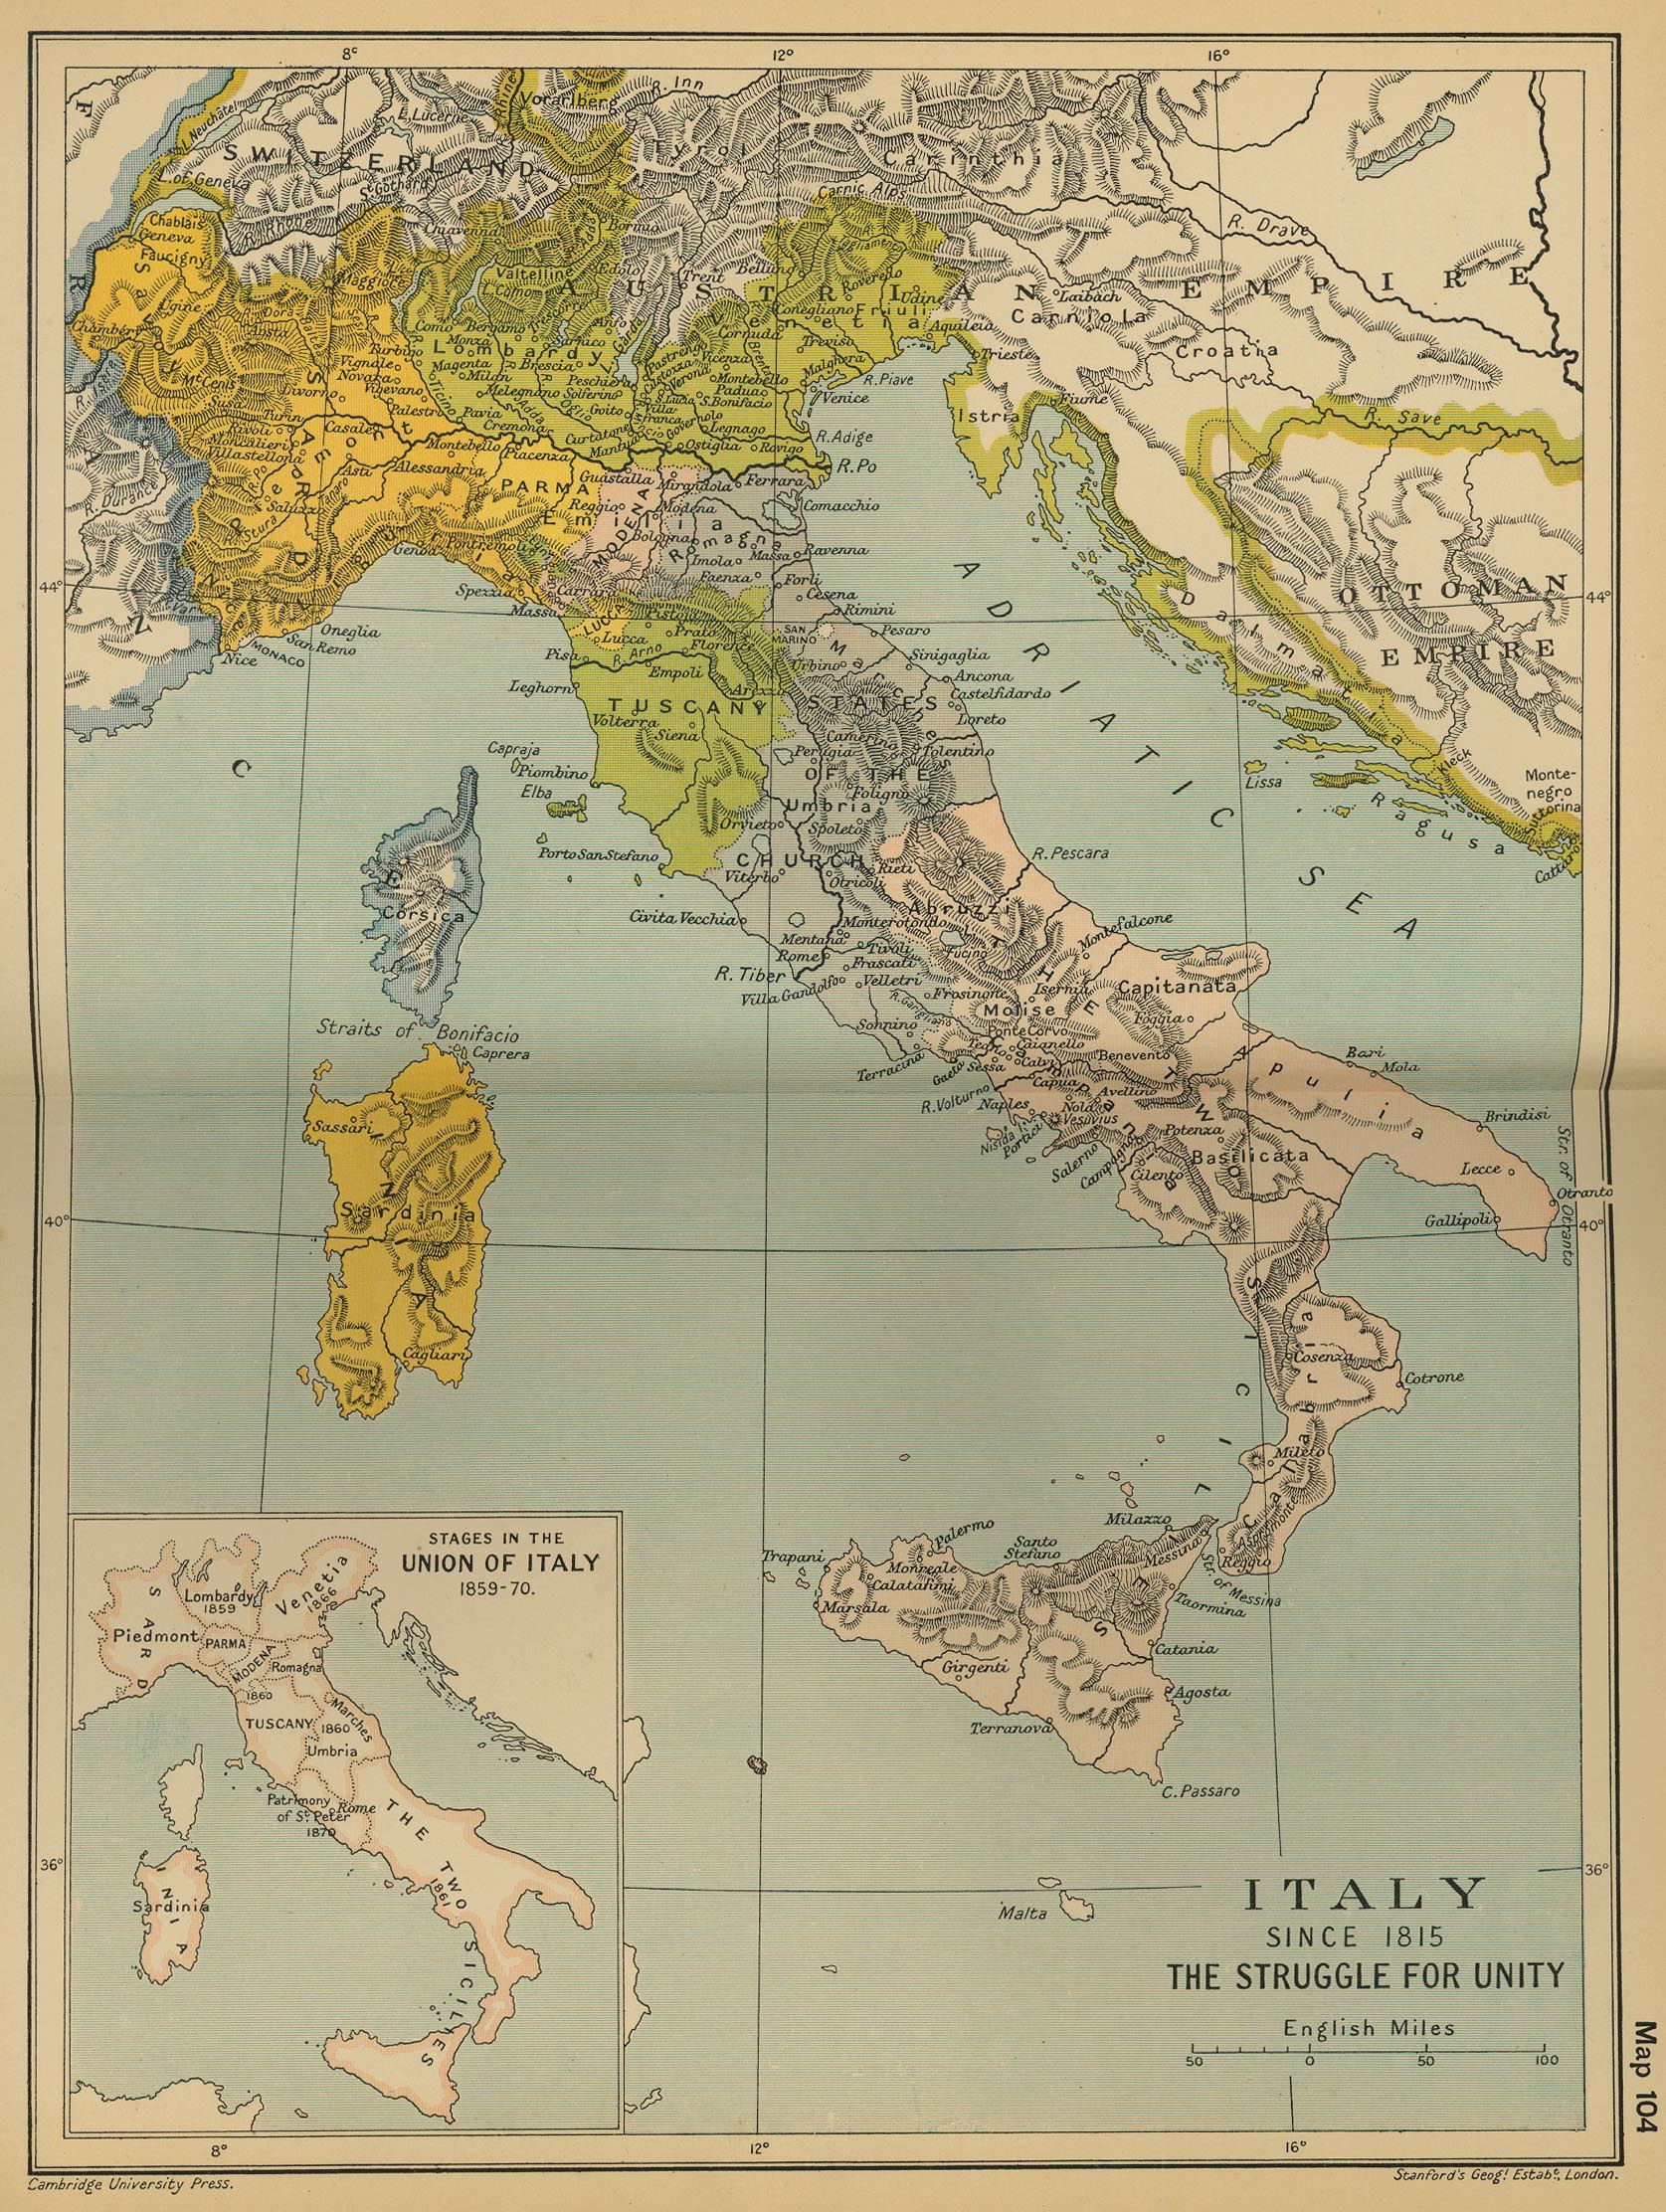 Map of Italy since 1815